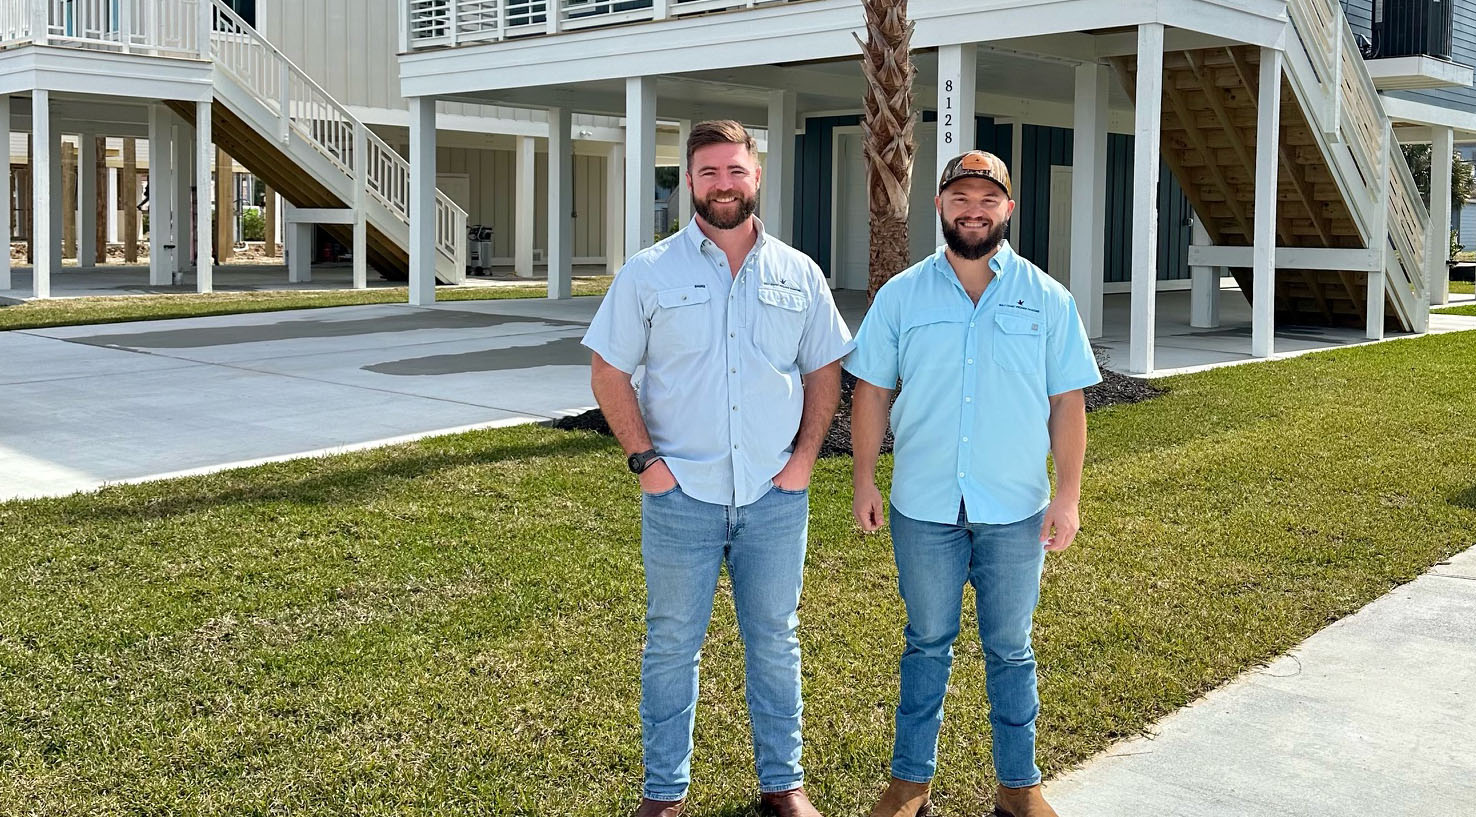 Owners of Gulf Coast Premier Painting